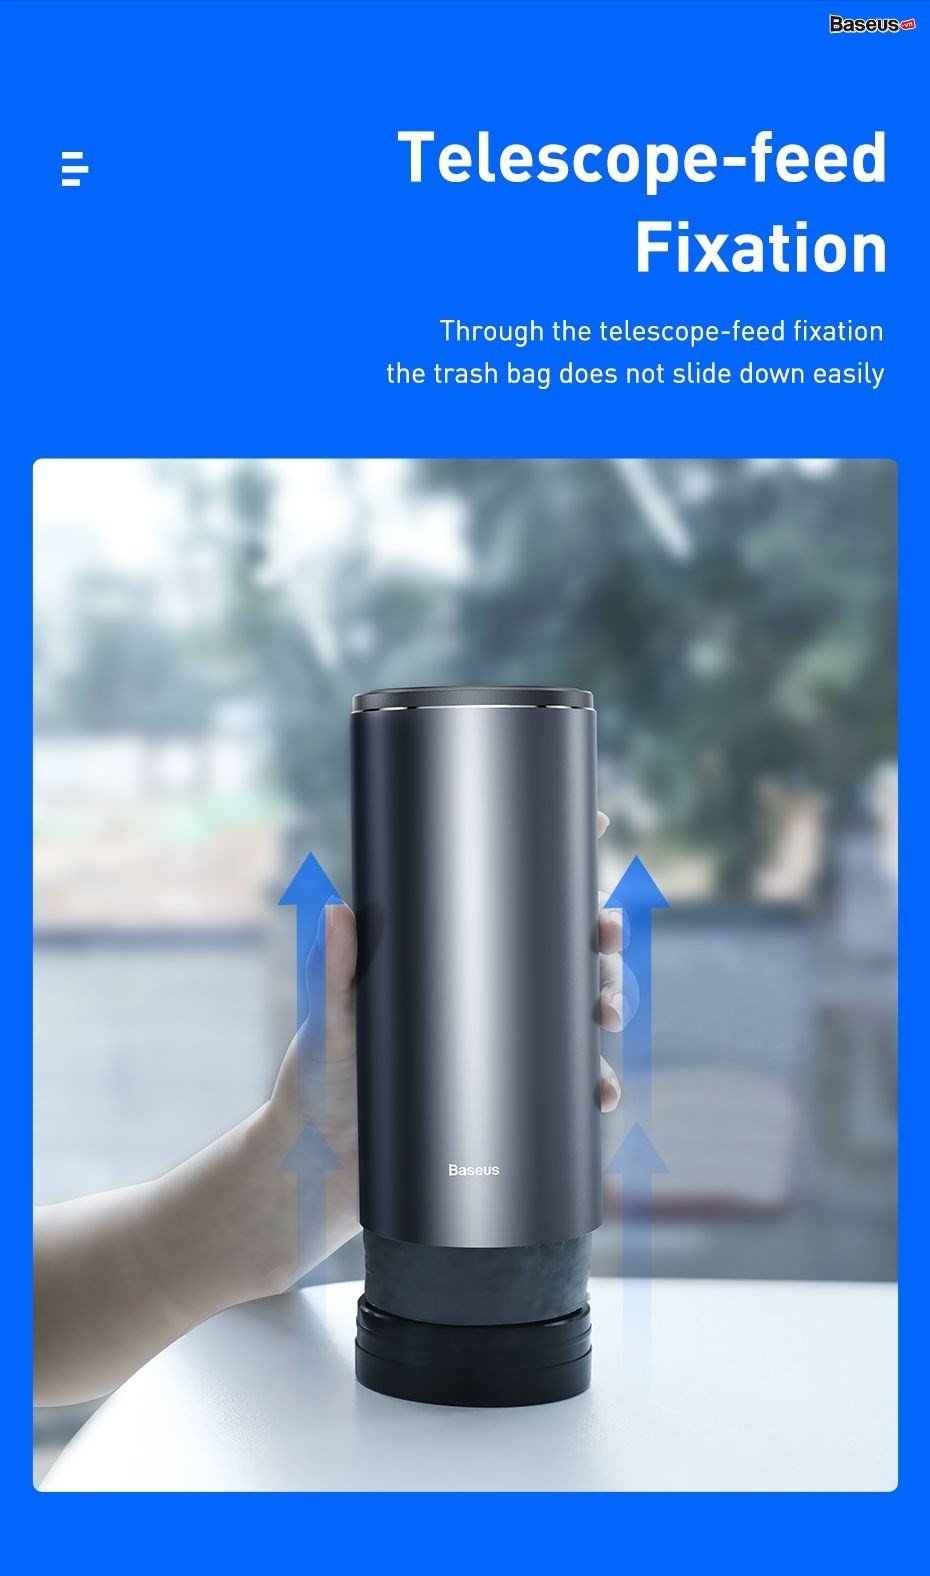 gentleman style vehicle mounted trash can 10 d49ab1a736f44a59a26057cfcad9cb14